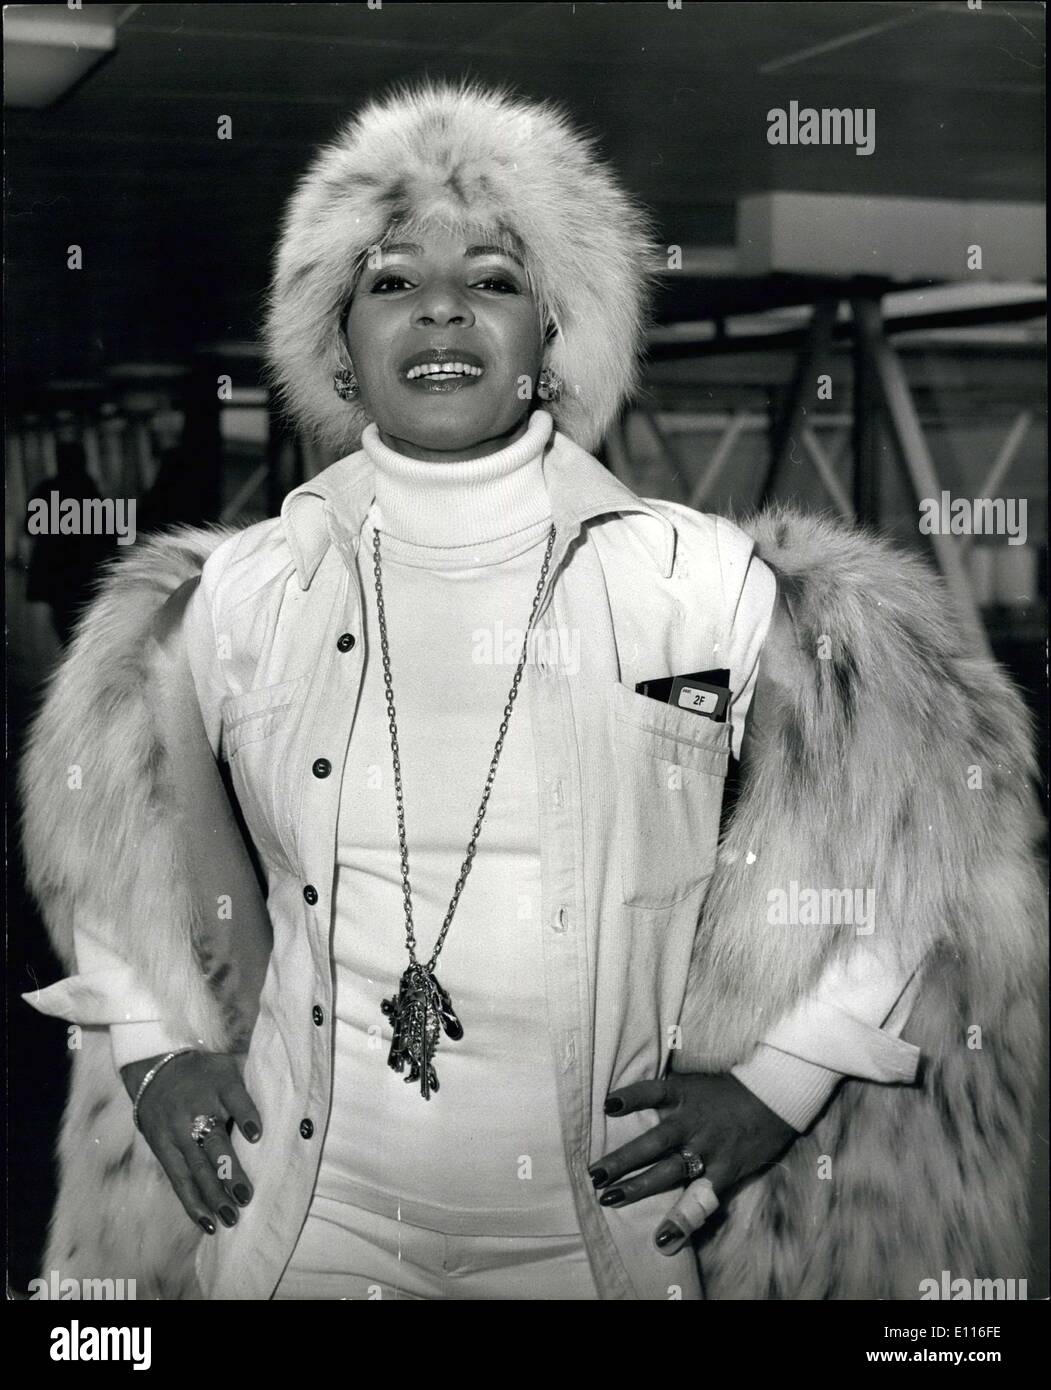 Jan. 27, 1976 - Singer Shirley Bassey arrives with a ?10,000 Lynx look: Photo shows looking a girl of distinction - Bassey, wore this sensational ?10,000 lynx coat and hat when she flew into Heathrow Airport from her home in Lugano, Switzerland, to record a new album. Stock Photo